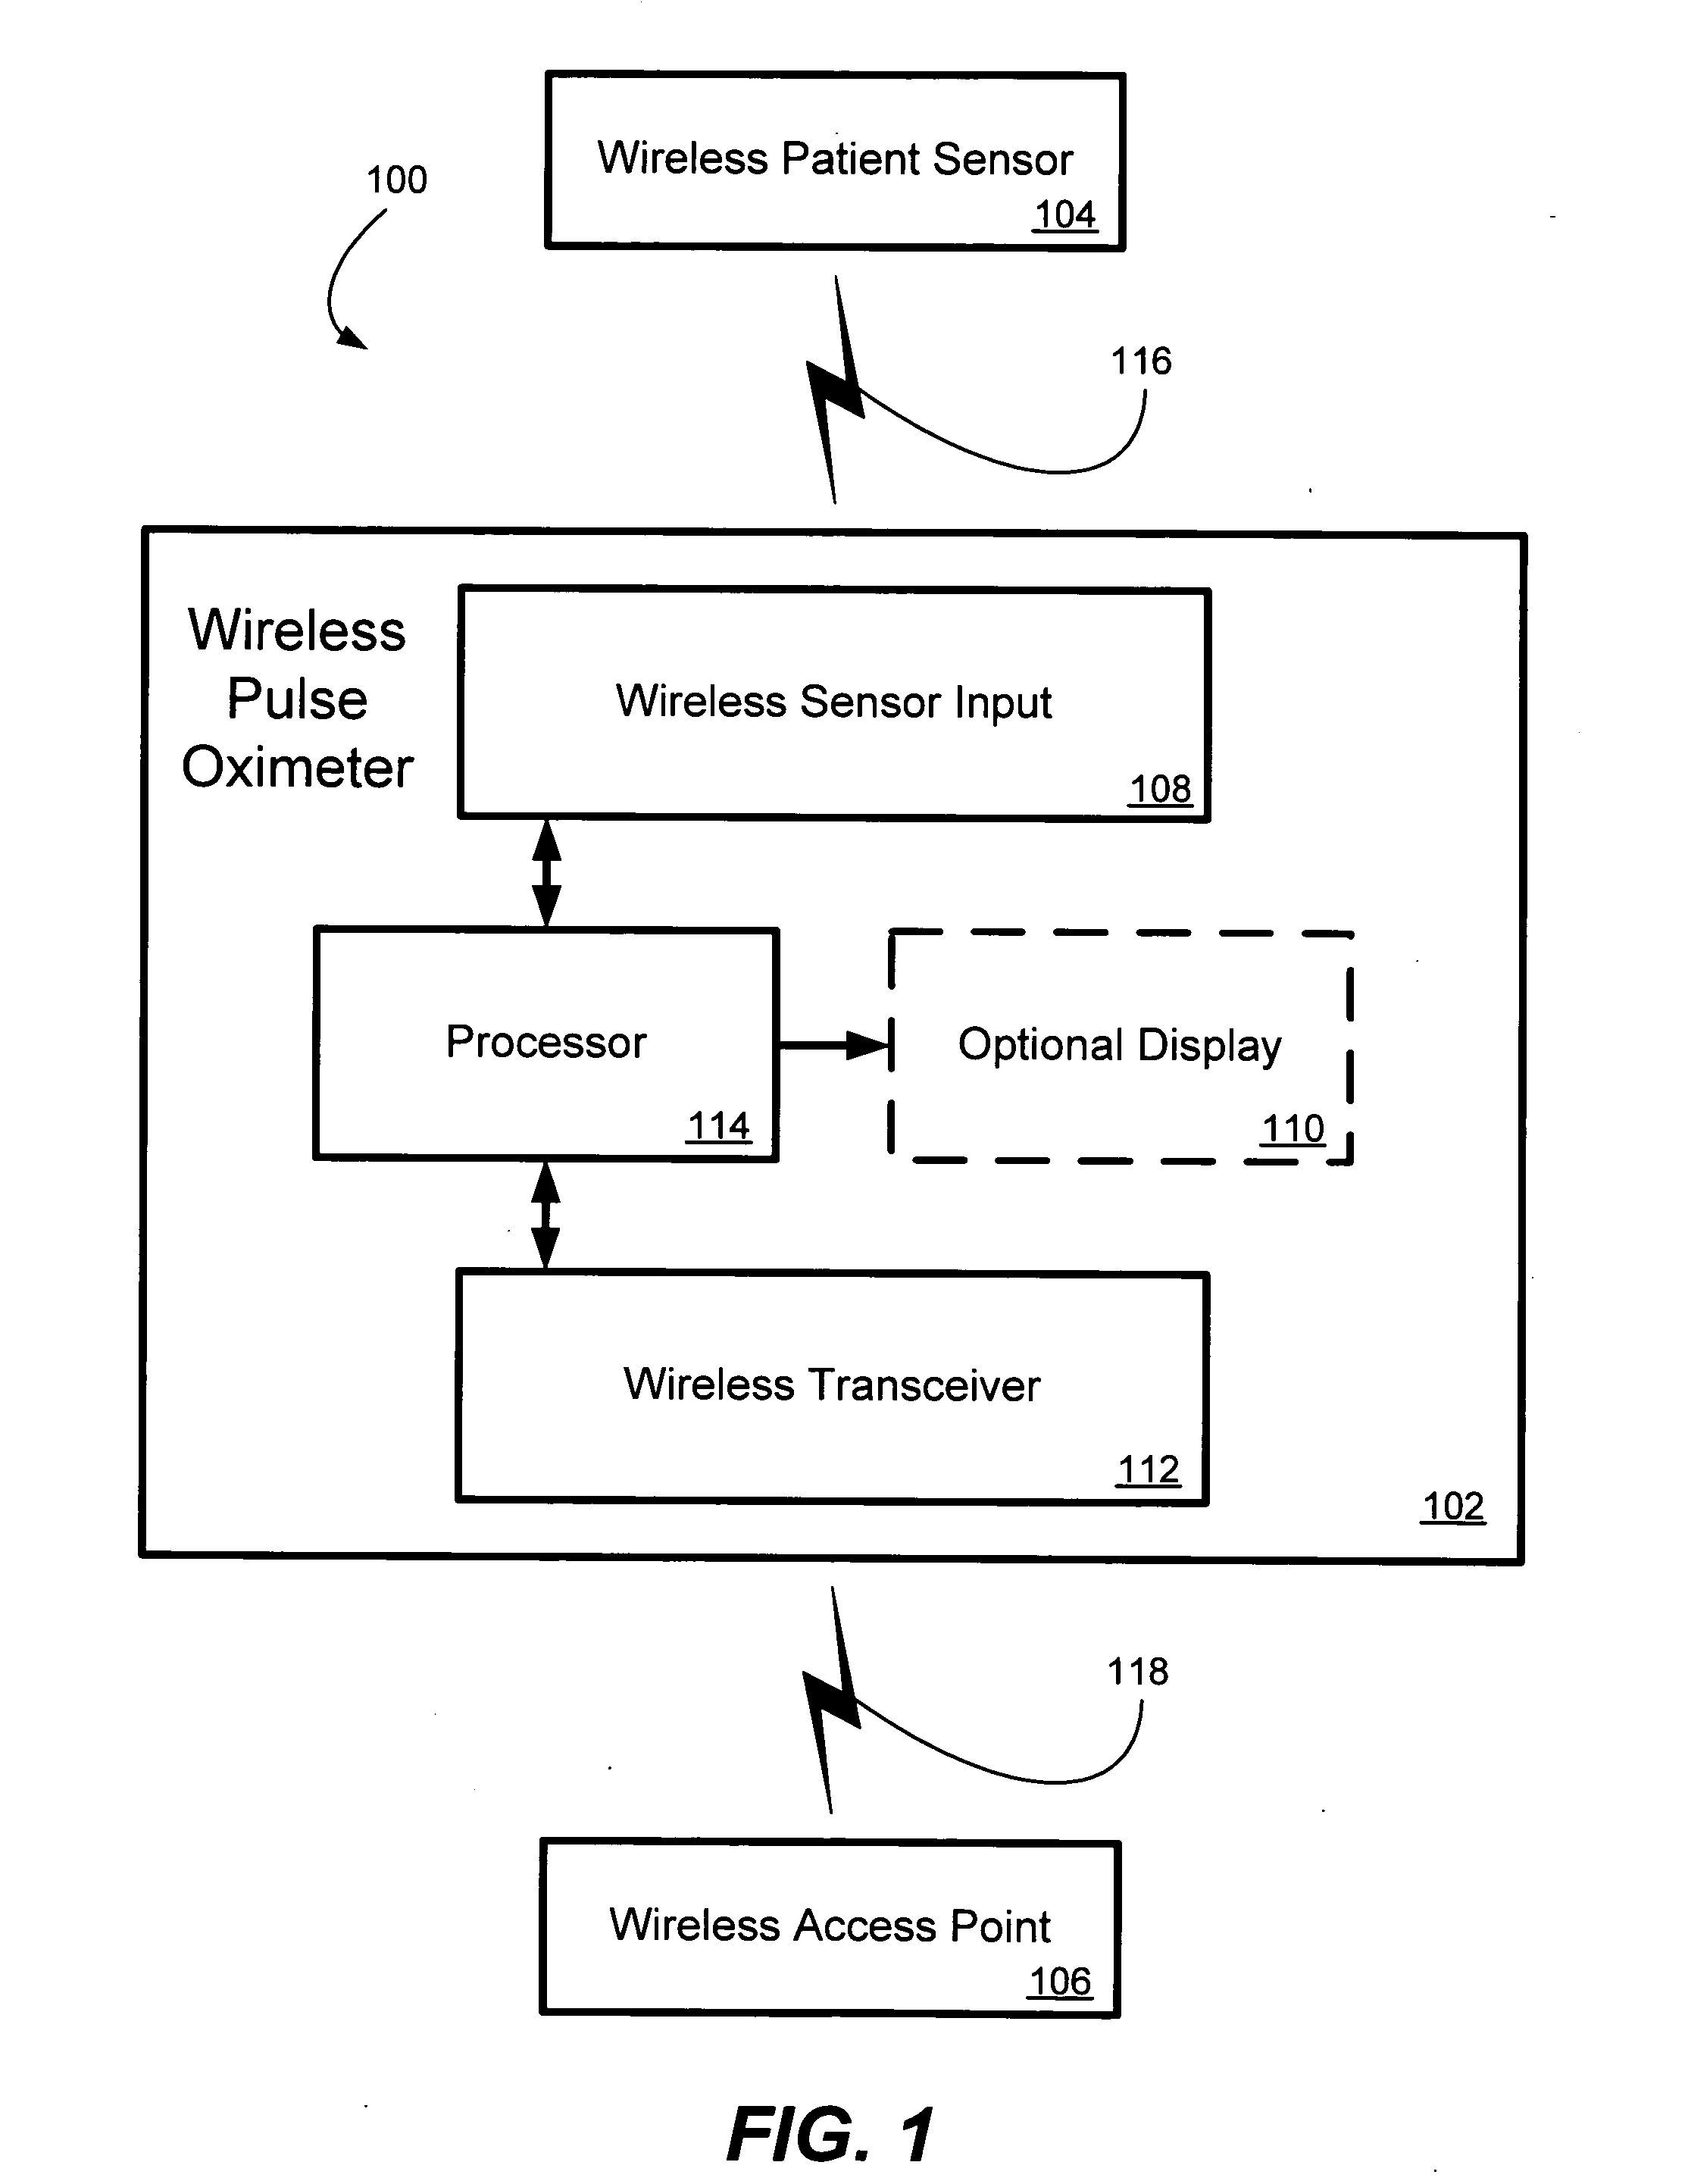 Wireless pulse oximeter configured for web serving, remote patient monitoring and method of operation